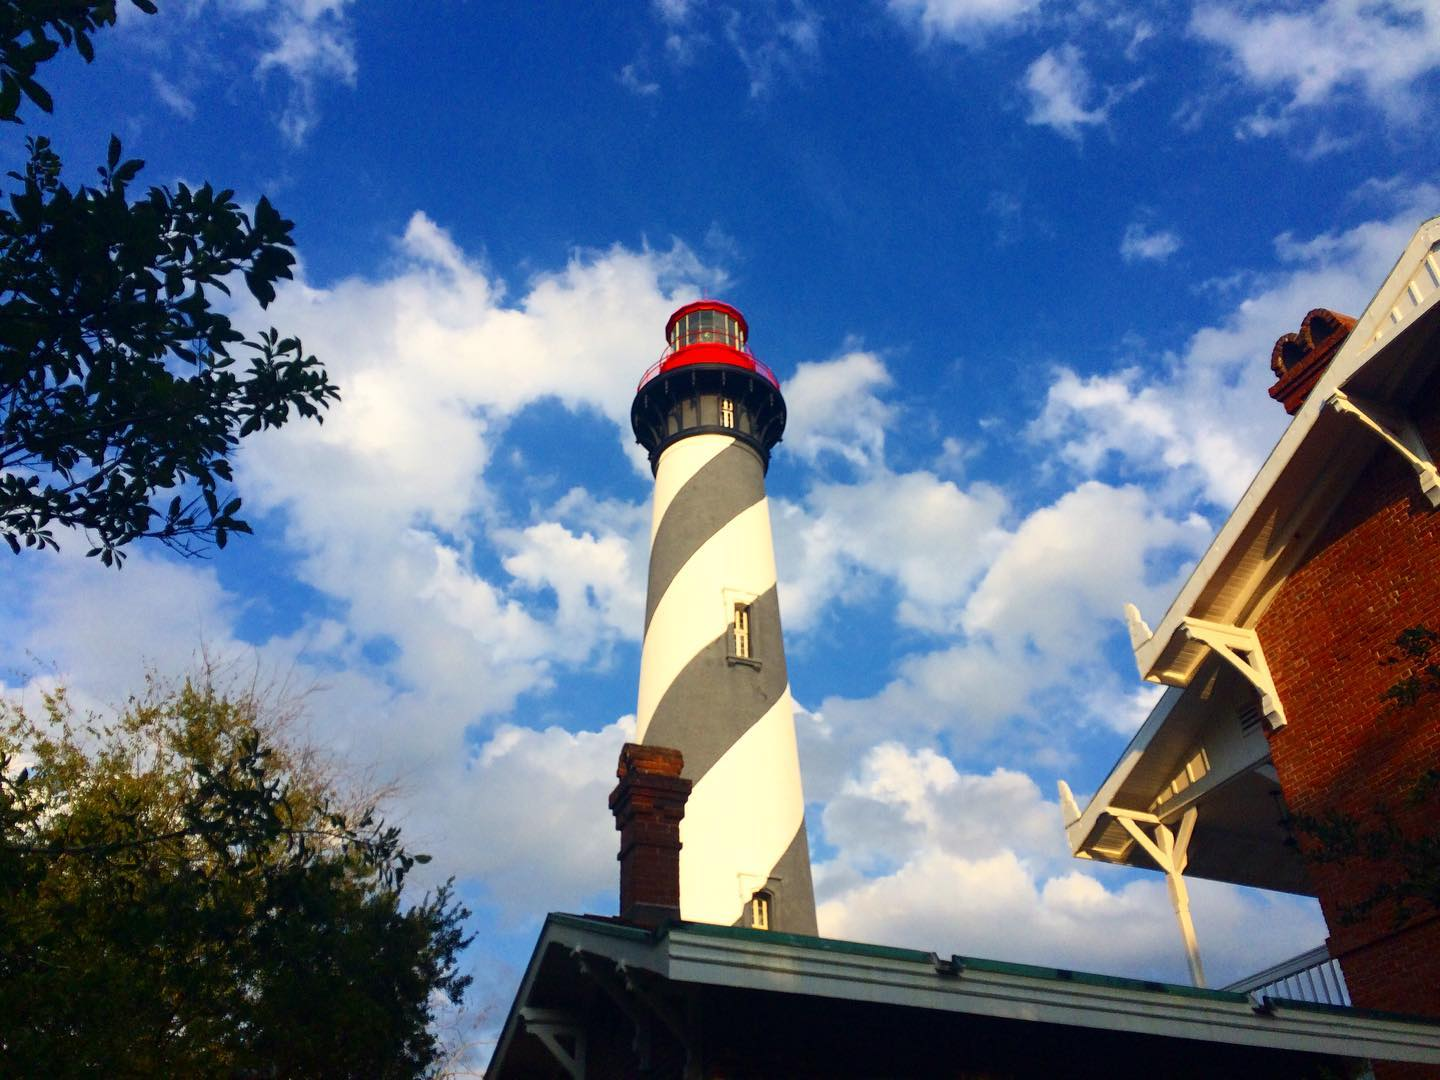 A view looking up at the St. Augustine Lighthouse